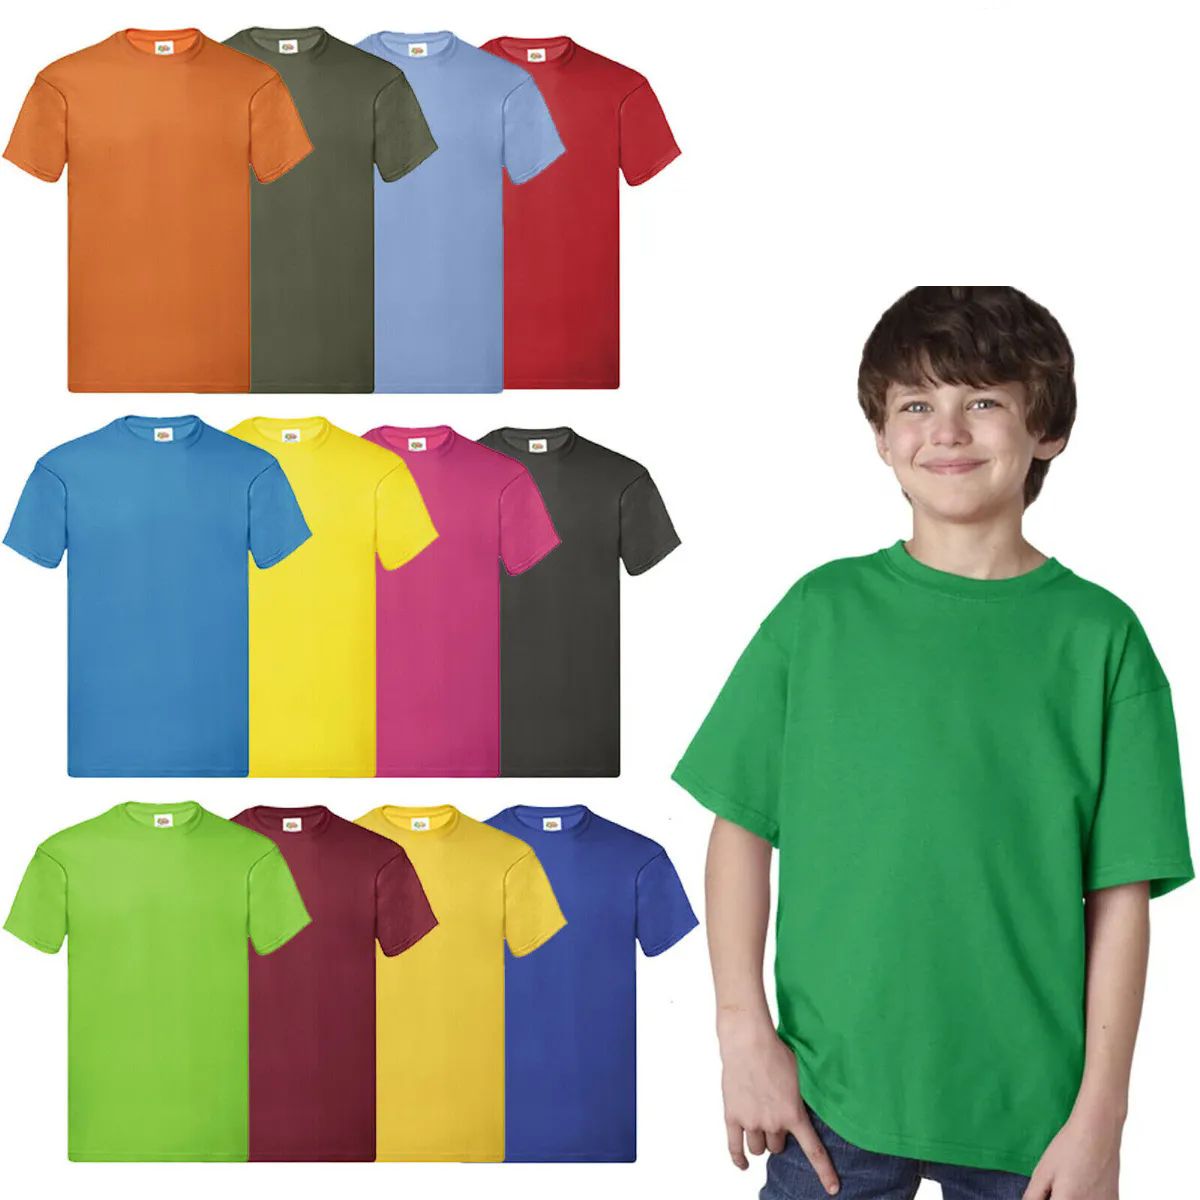 432 Pieces of Billion Hats Kids Youth Cotton Assorted Colors T Shirts Size xs